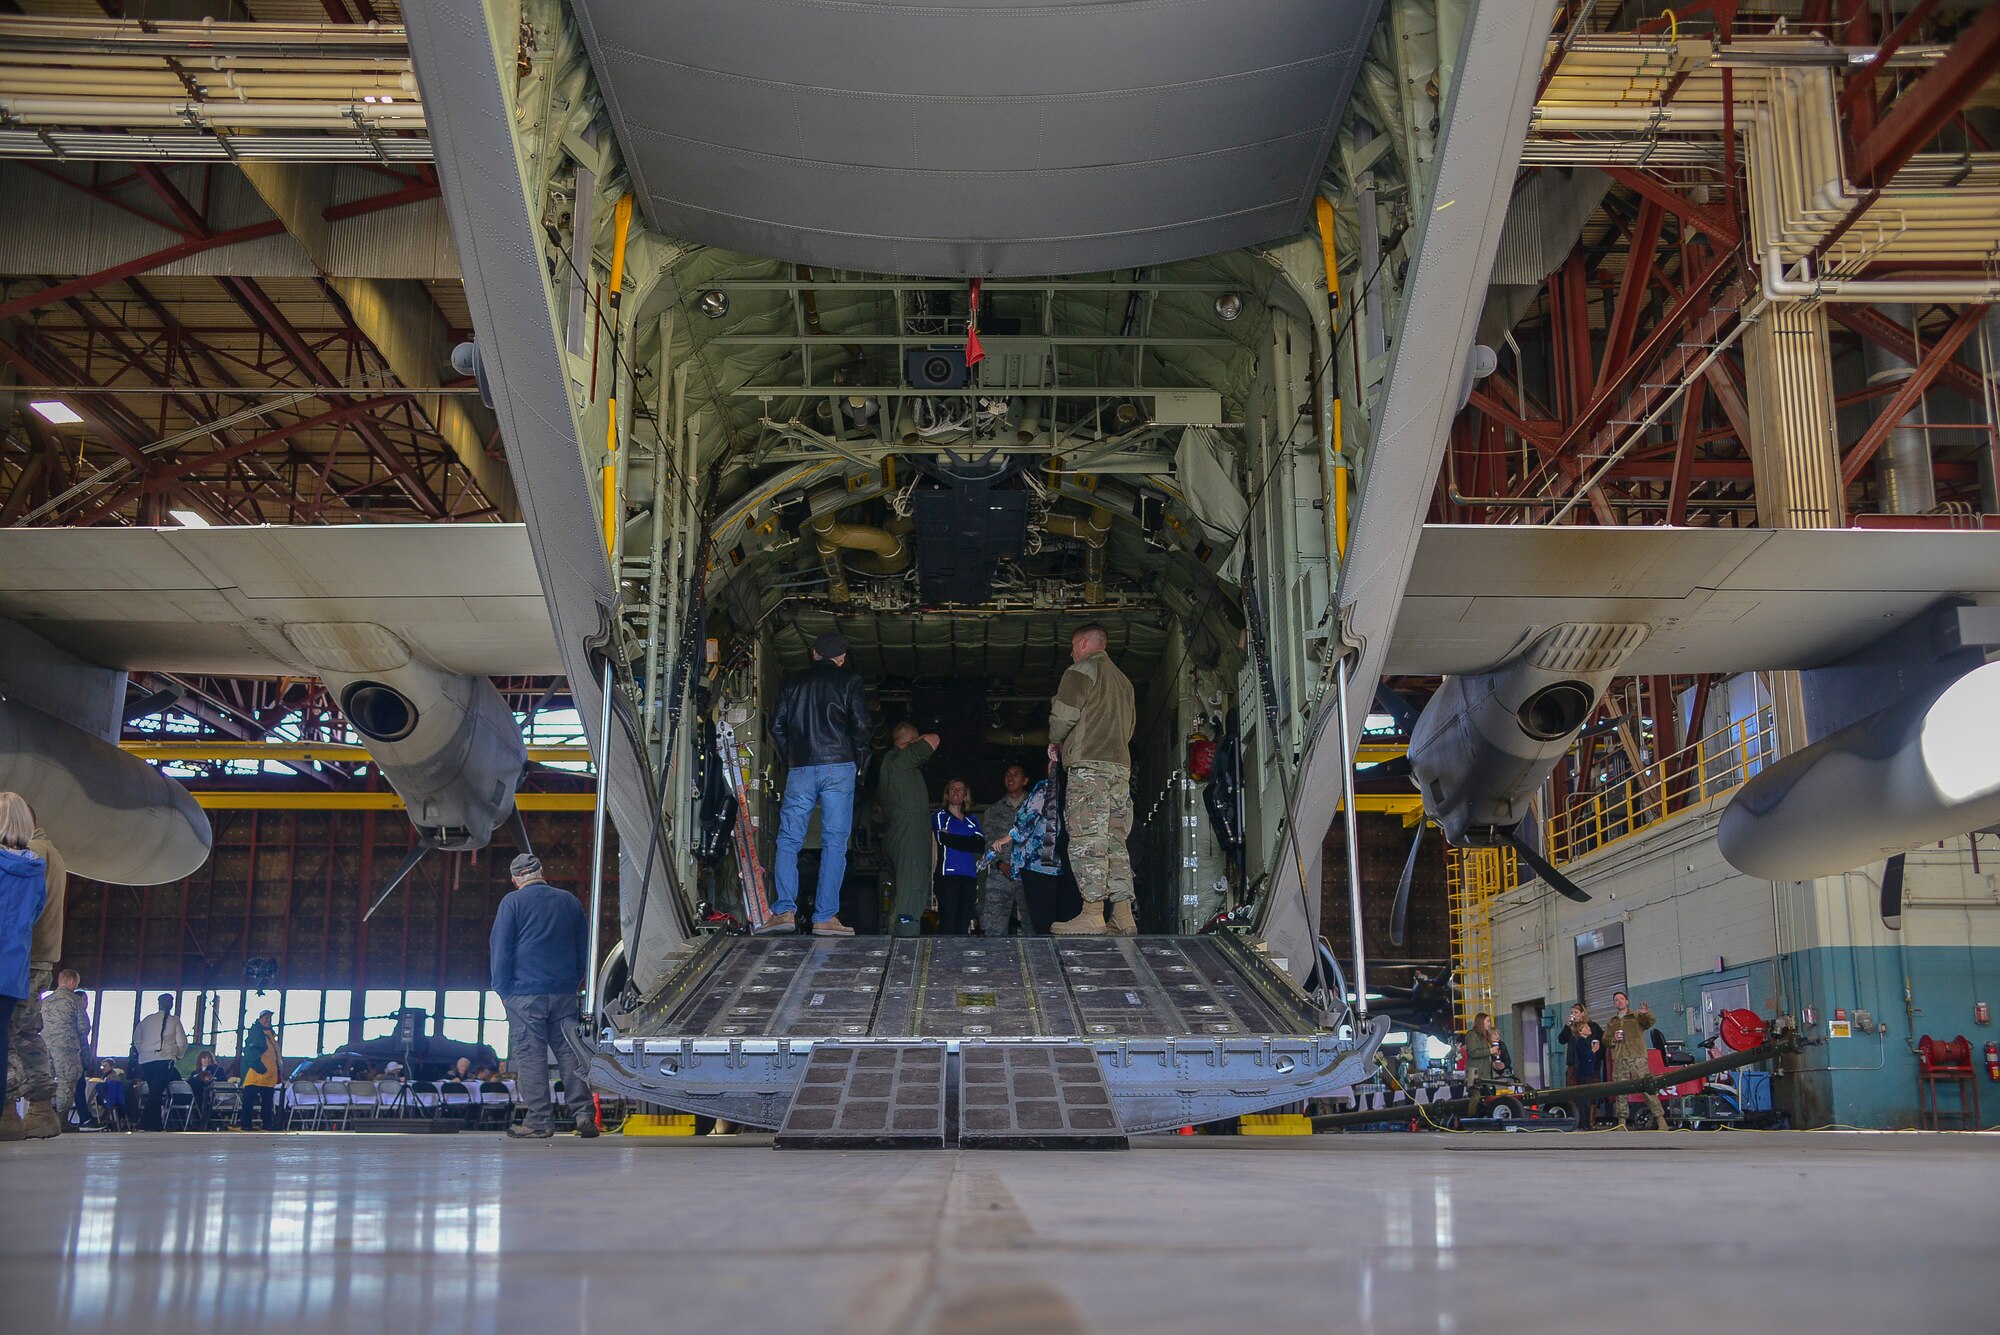 Airmen with the 58th Special Operations Wing show Warriors for Warriors event attendees the inside of an aircraft at Kirtland Air Force Base, N.M., Nov. 2, 2019. Additional members of the 58th SOW spent the entire event with the visitors showing them around and telling them about the different aircraft and the Air Force. (U.S. Air Force photo by Staff Sgt. Kimberly Nagle)